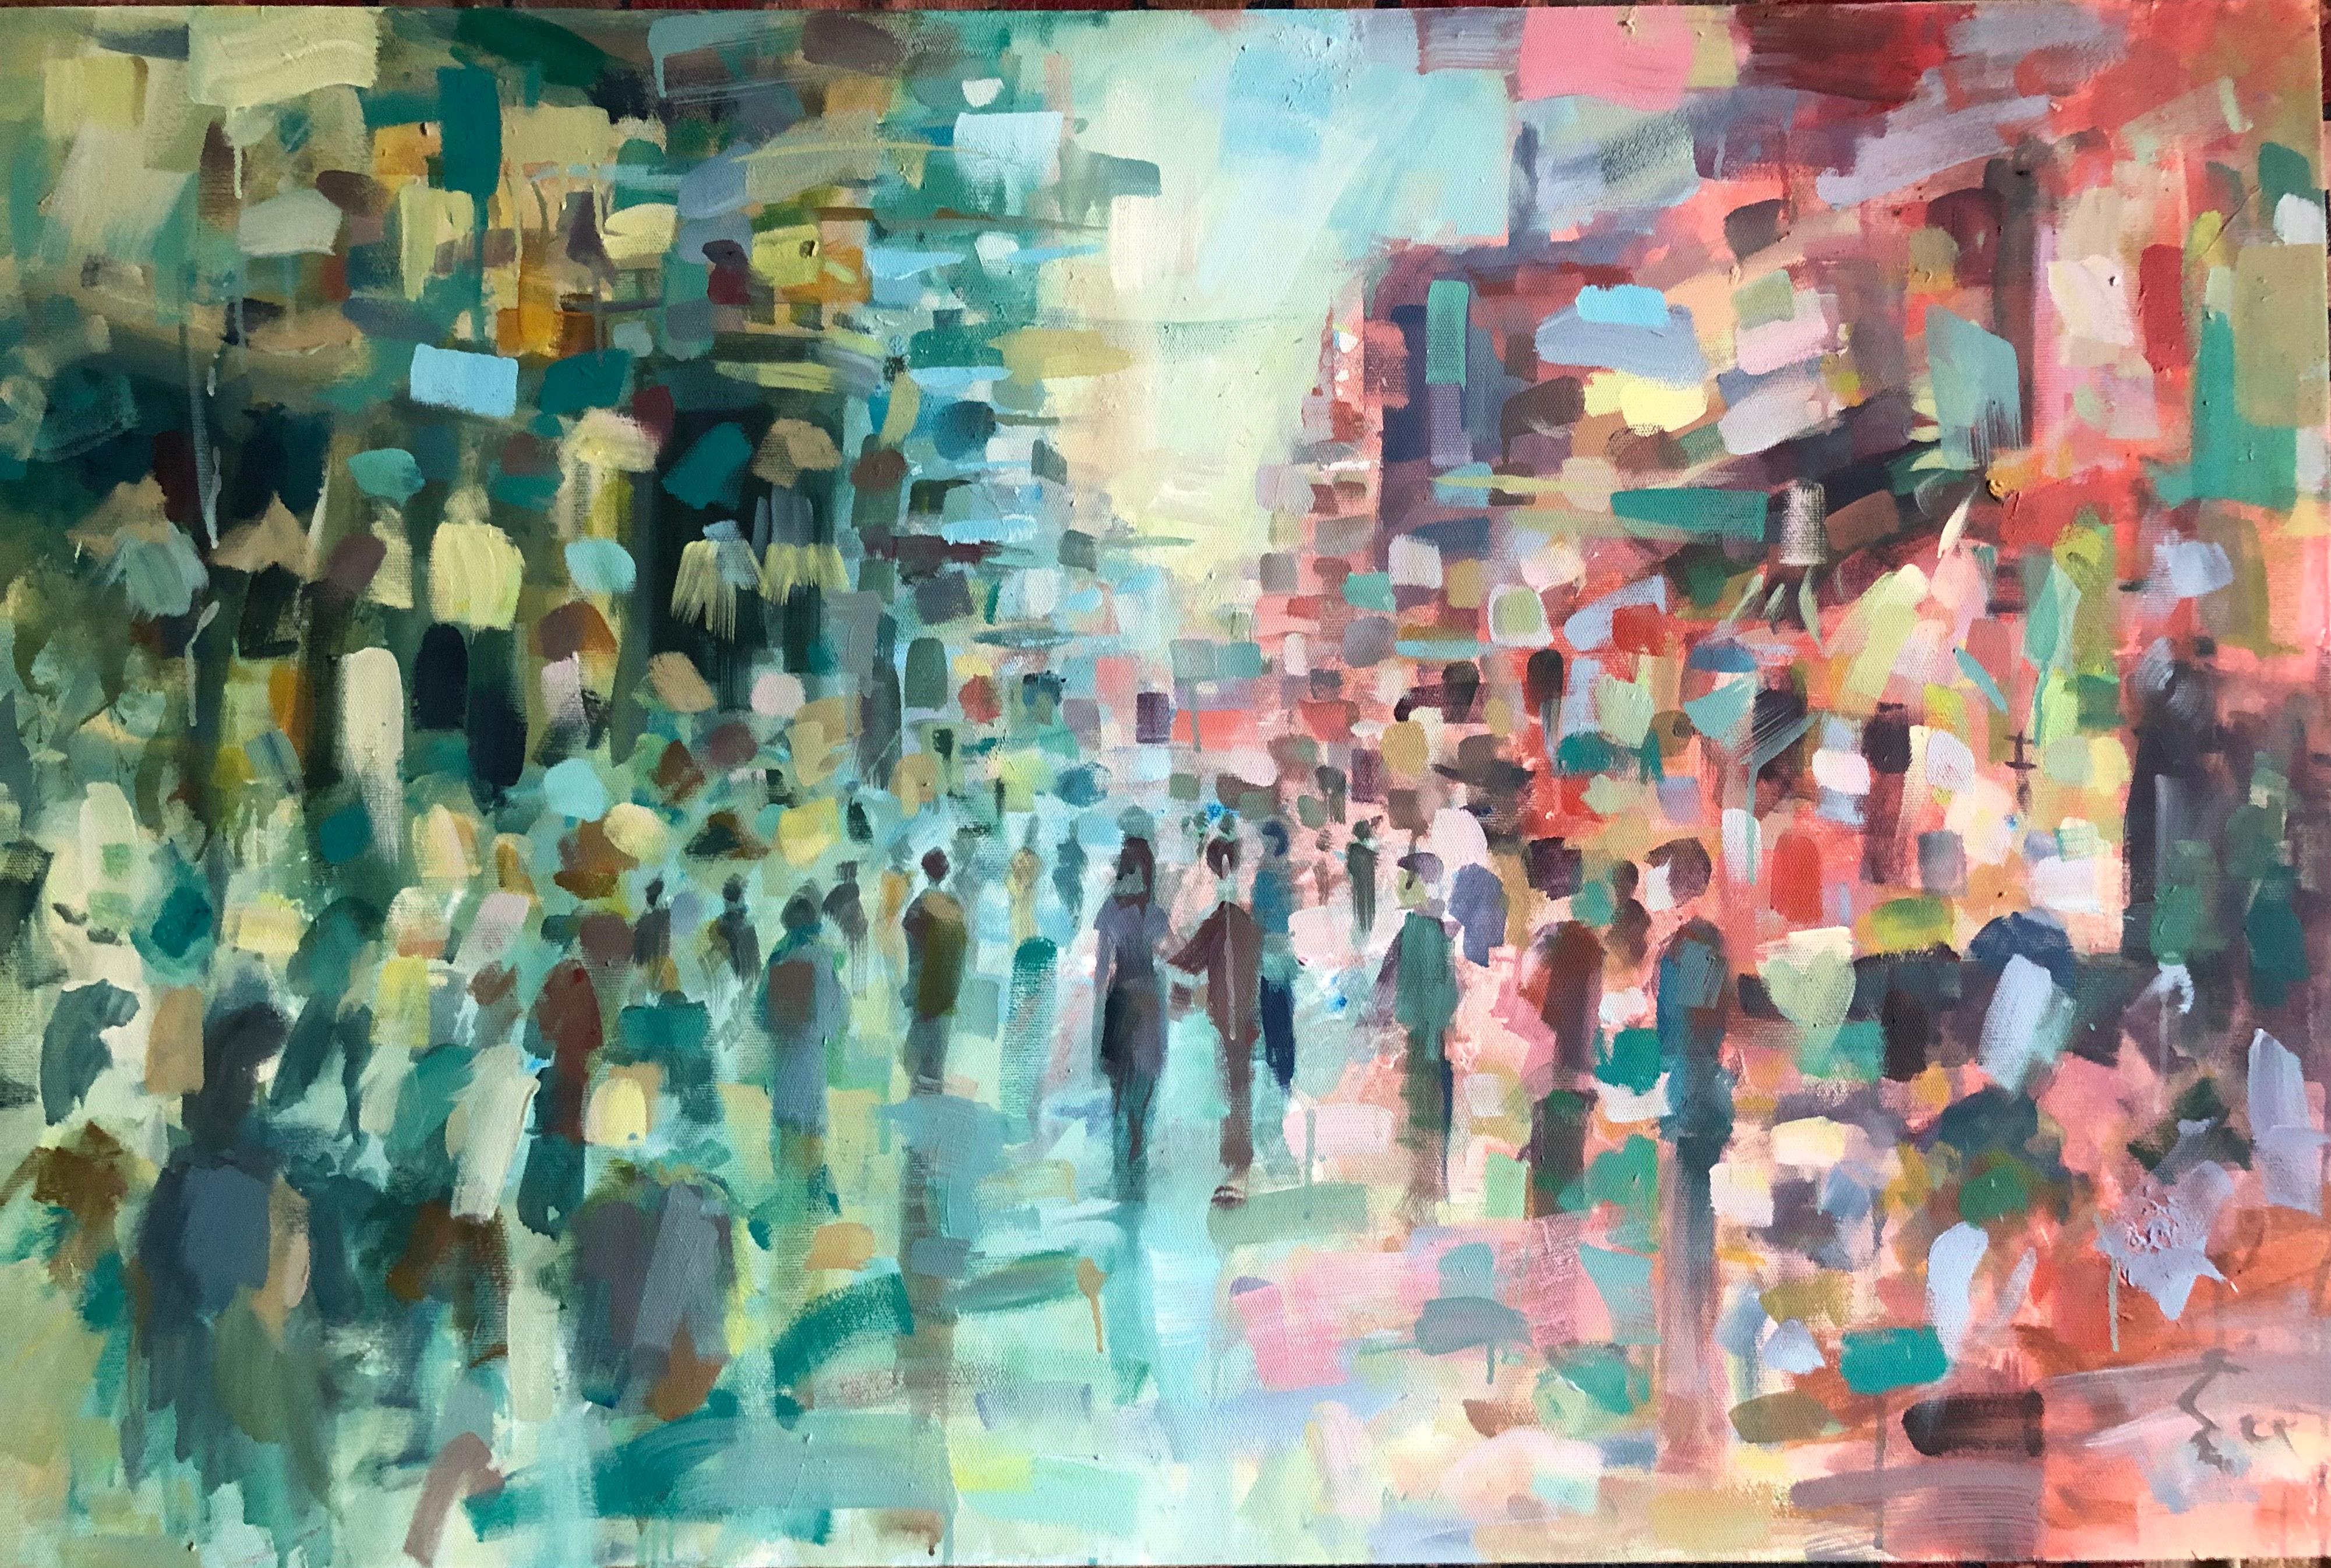 "El Moez Street 2" Abstract Painting 31.5" x 47" inch by Ahmed Dafrawy 